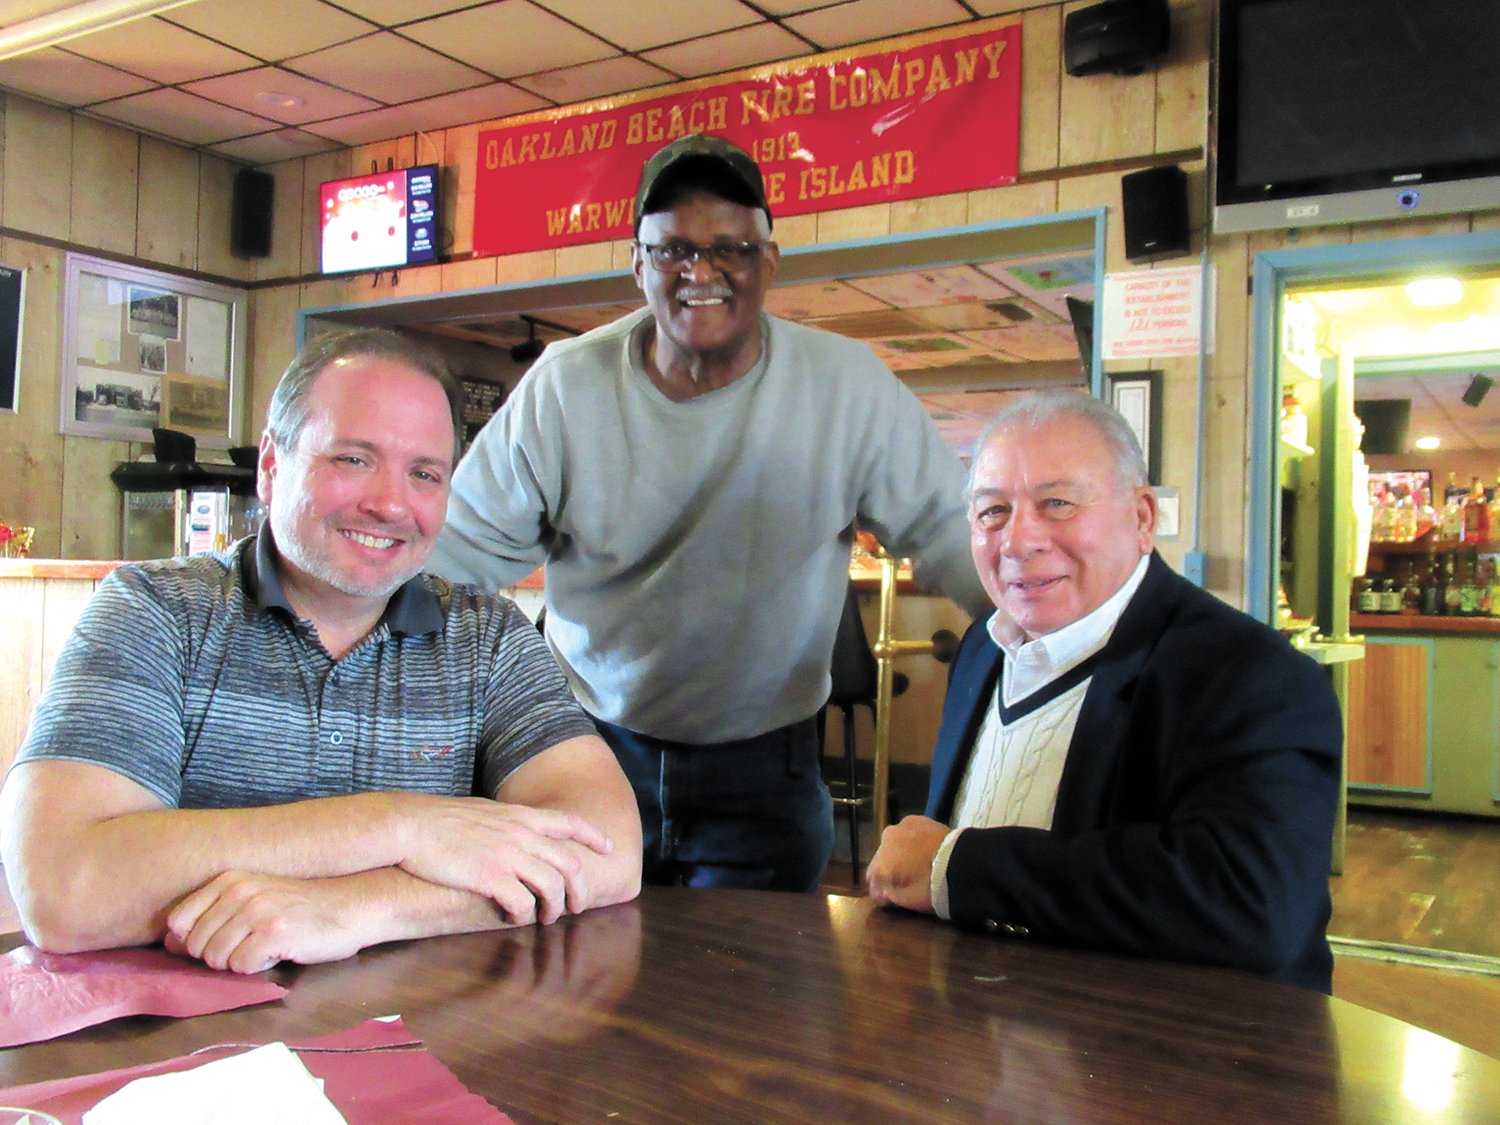 WARM WELCOME: Vin Bellows (middle) welcomes Al Caldarone and is son Al Caldarone Jr. before sitting with them for last Thursday’s fantastic foodfest at the Oakland Beach Firemen’s’ Club in Warwick.